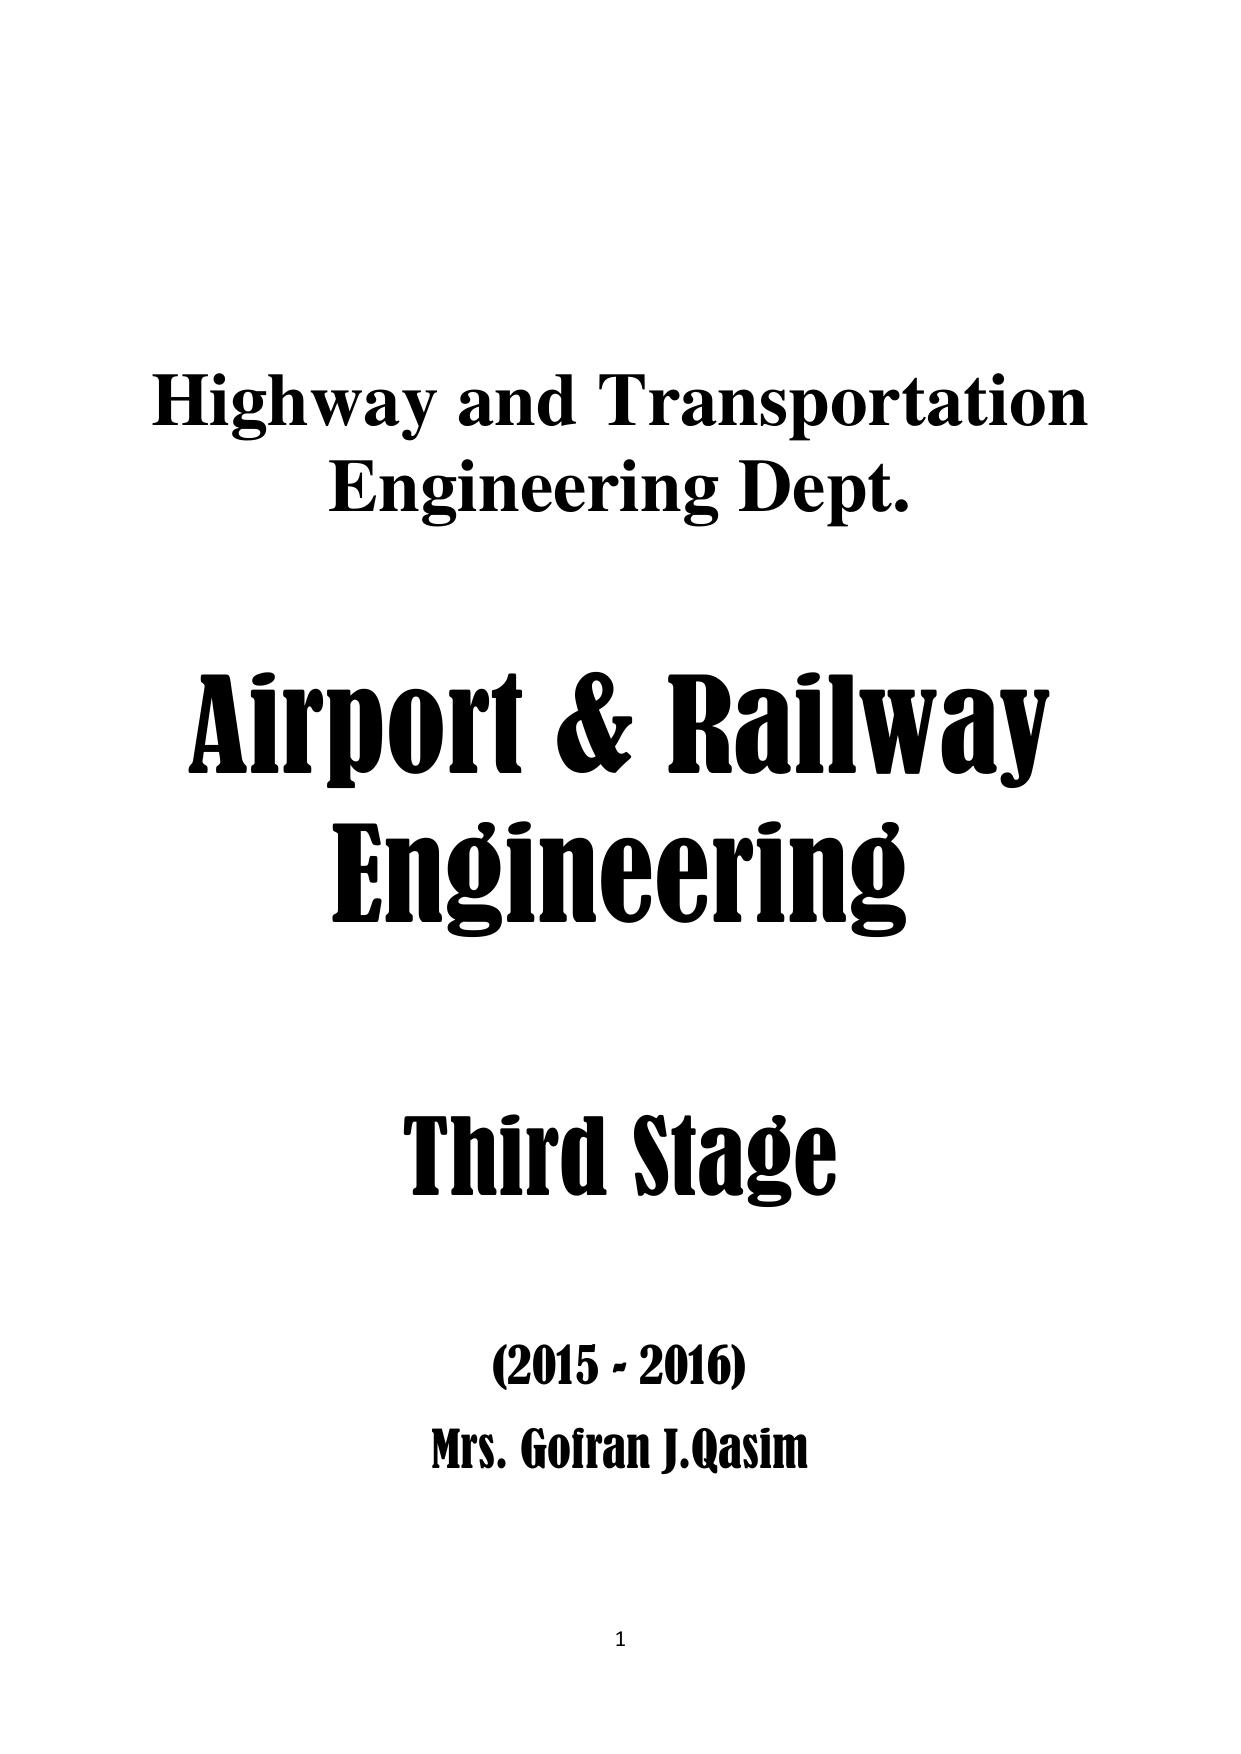 Airport and Railway Engineering